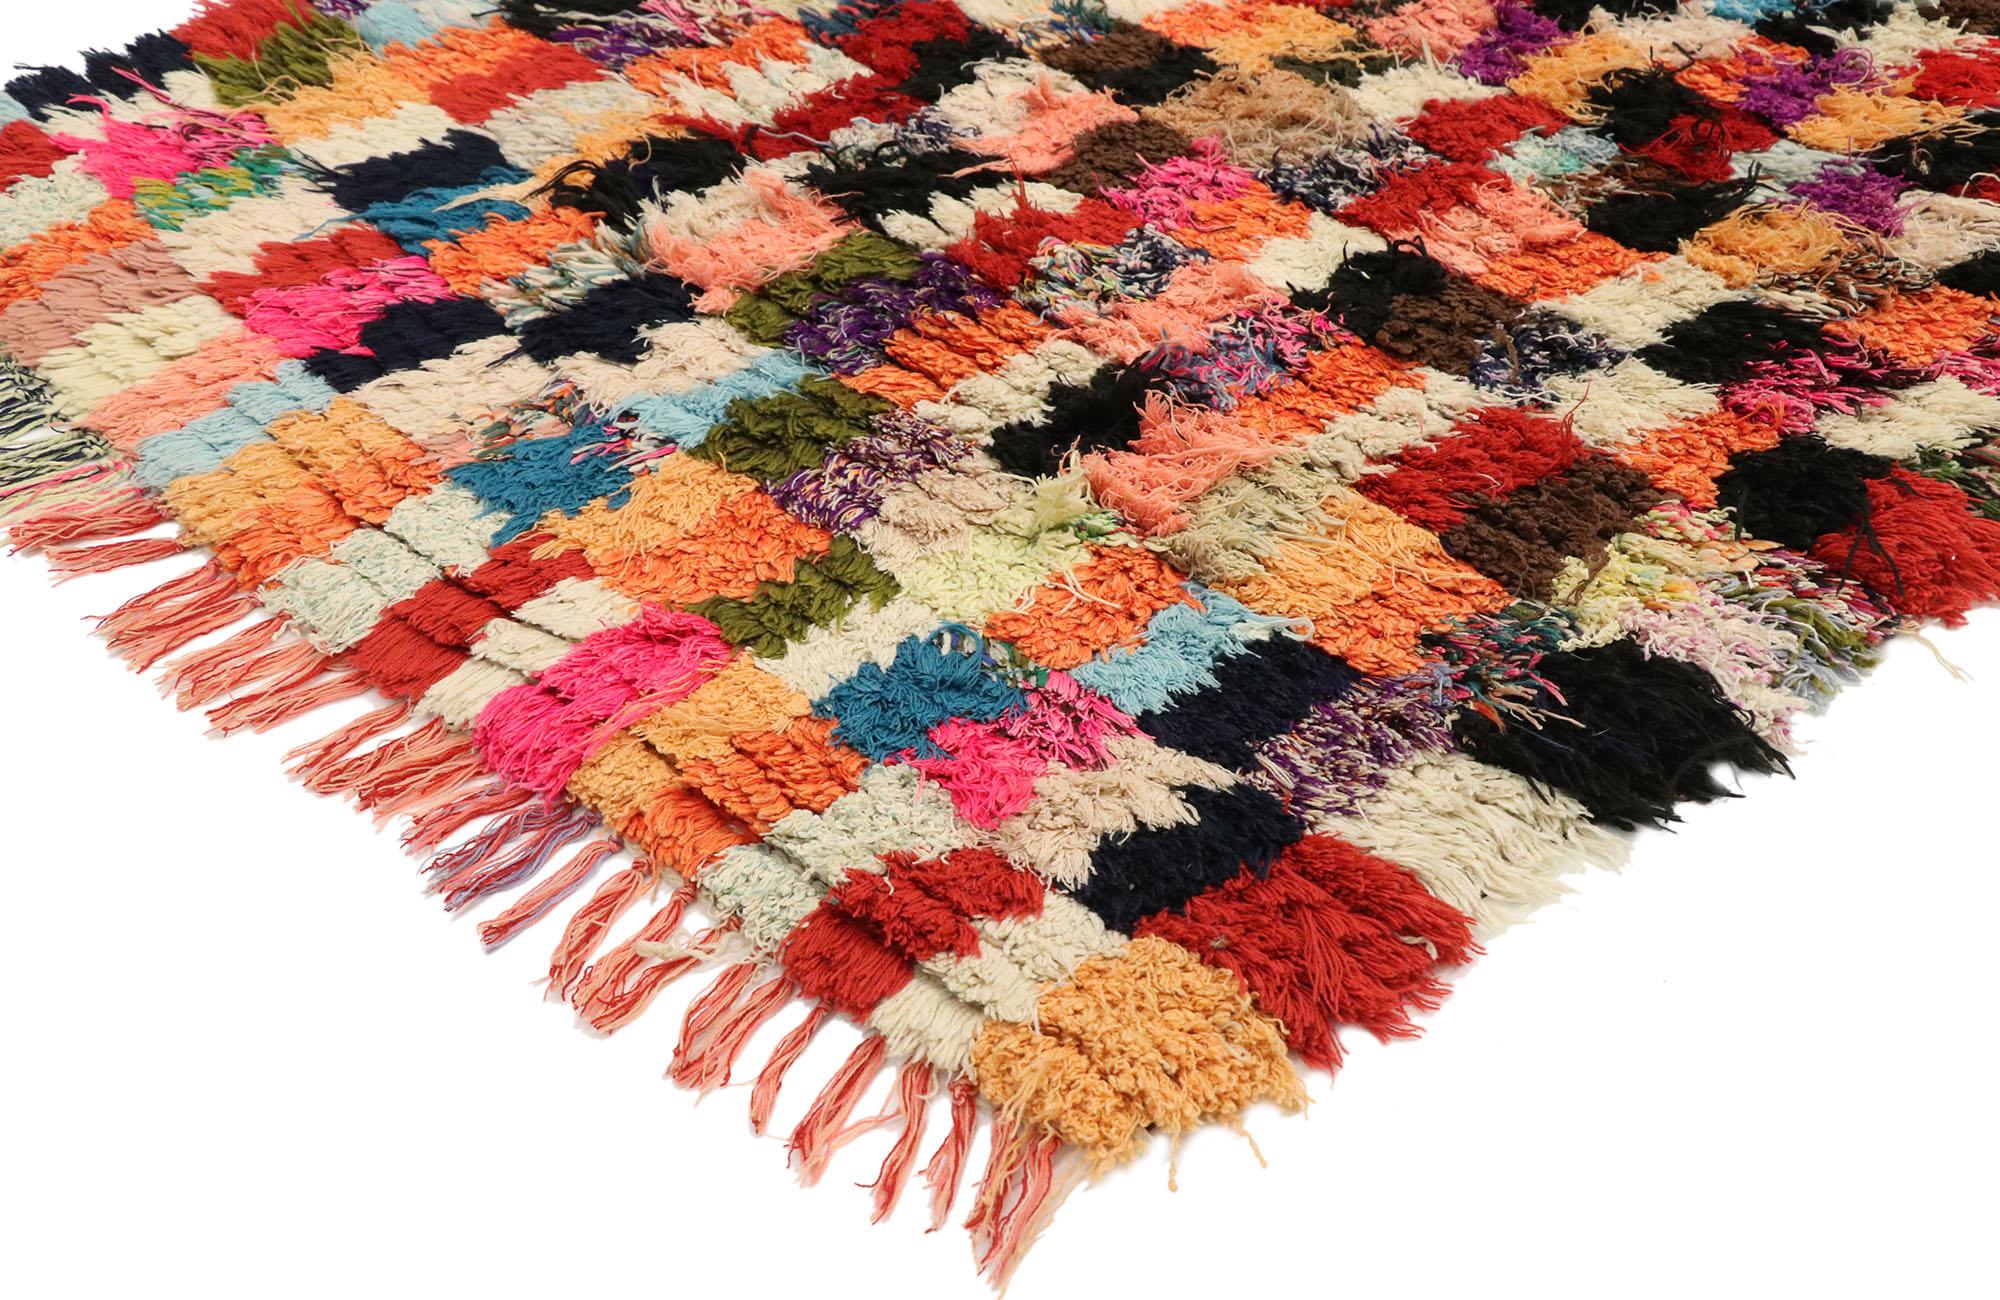 20566, colorful vintage Moroccan Boucherouite accent rug, Shaggy Moroccan rug. This vintage Berber Moroccan rug marries the vintage style of the Berbers with a color scheme and geometric design that is now considered to be a contemporary style. The